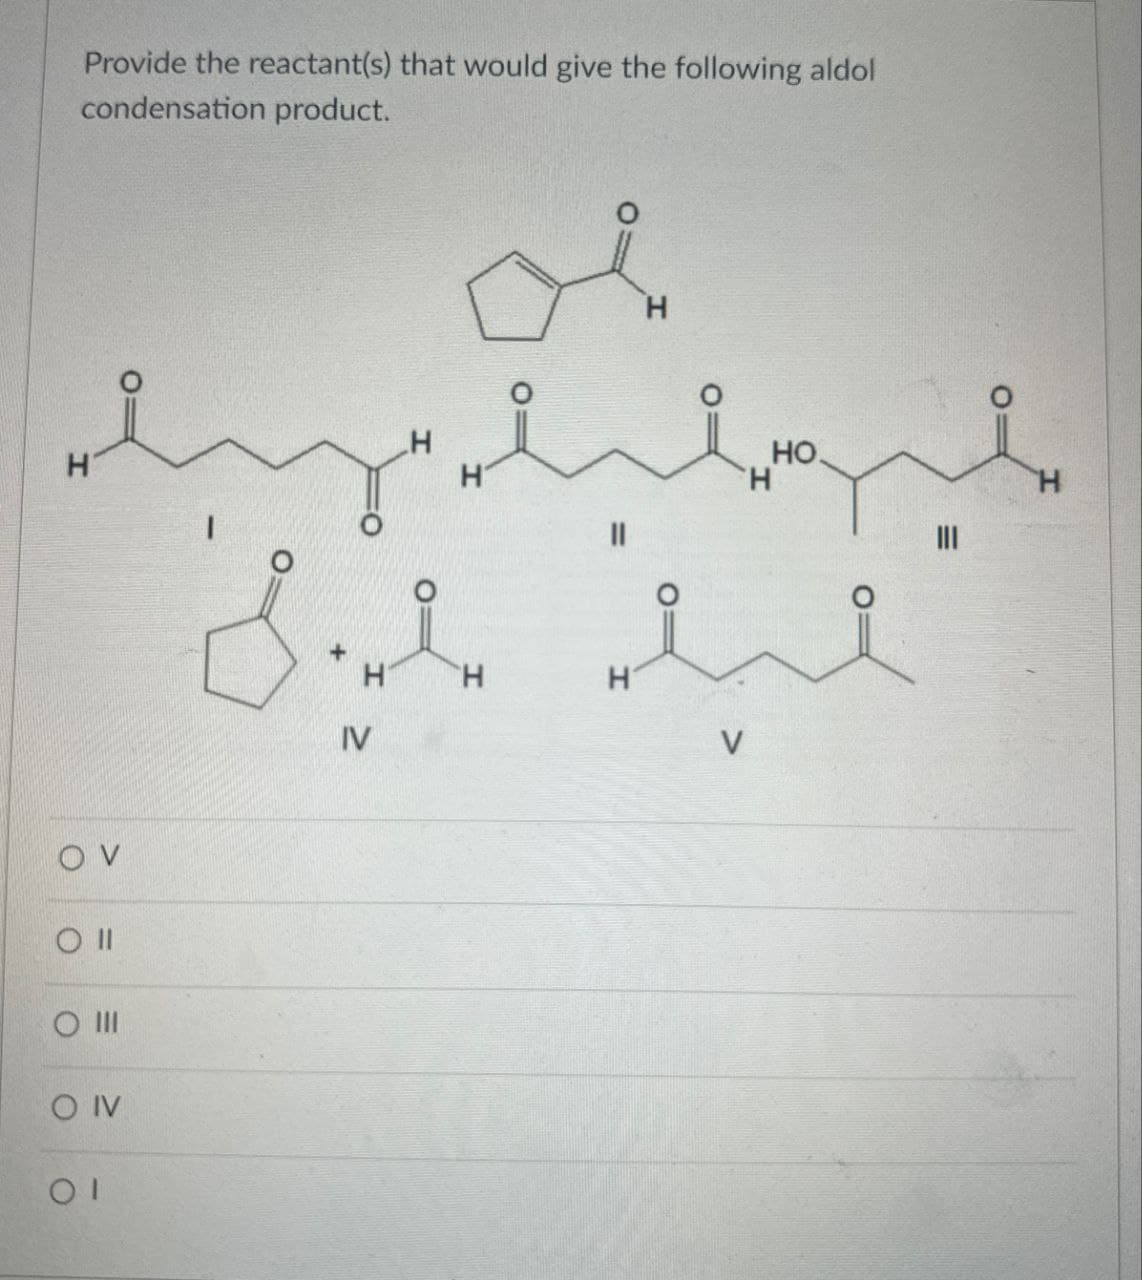 Provide the reactant(s) that would give the following aldol
condensation product.
H
H
OV
O II
O III
O IV
ΟΙ
H
။
H
HO
H
ii
+
H
H
H
IV
V